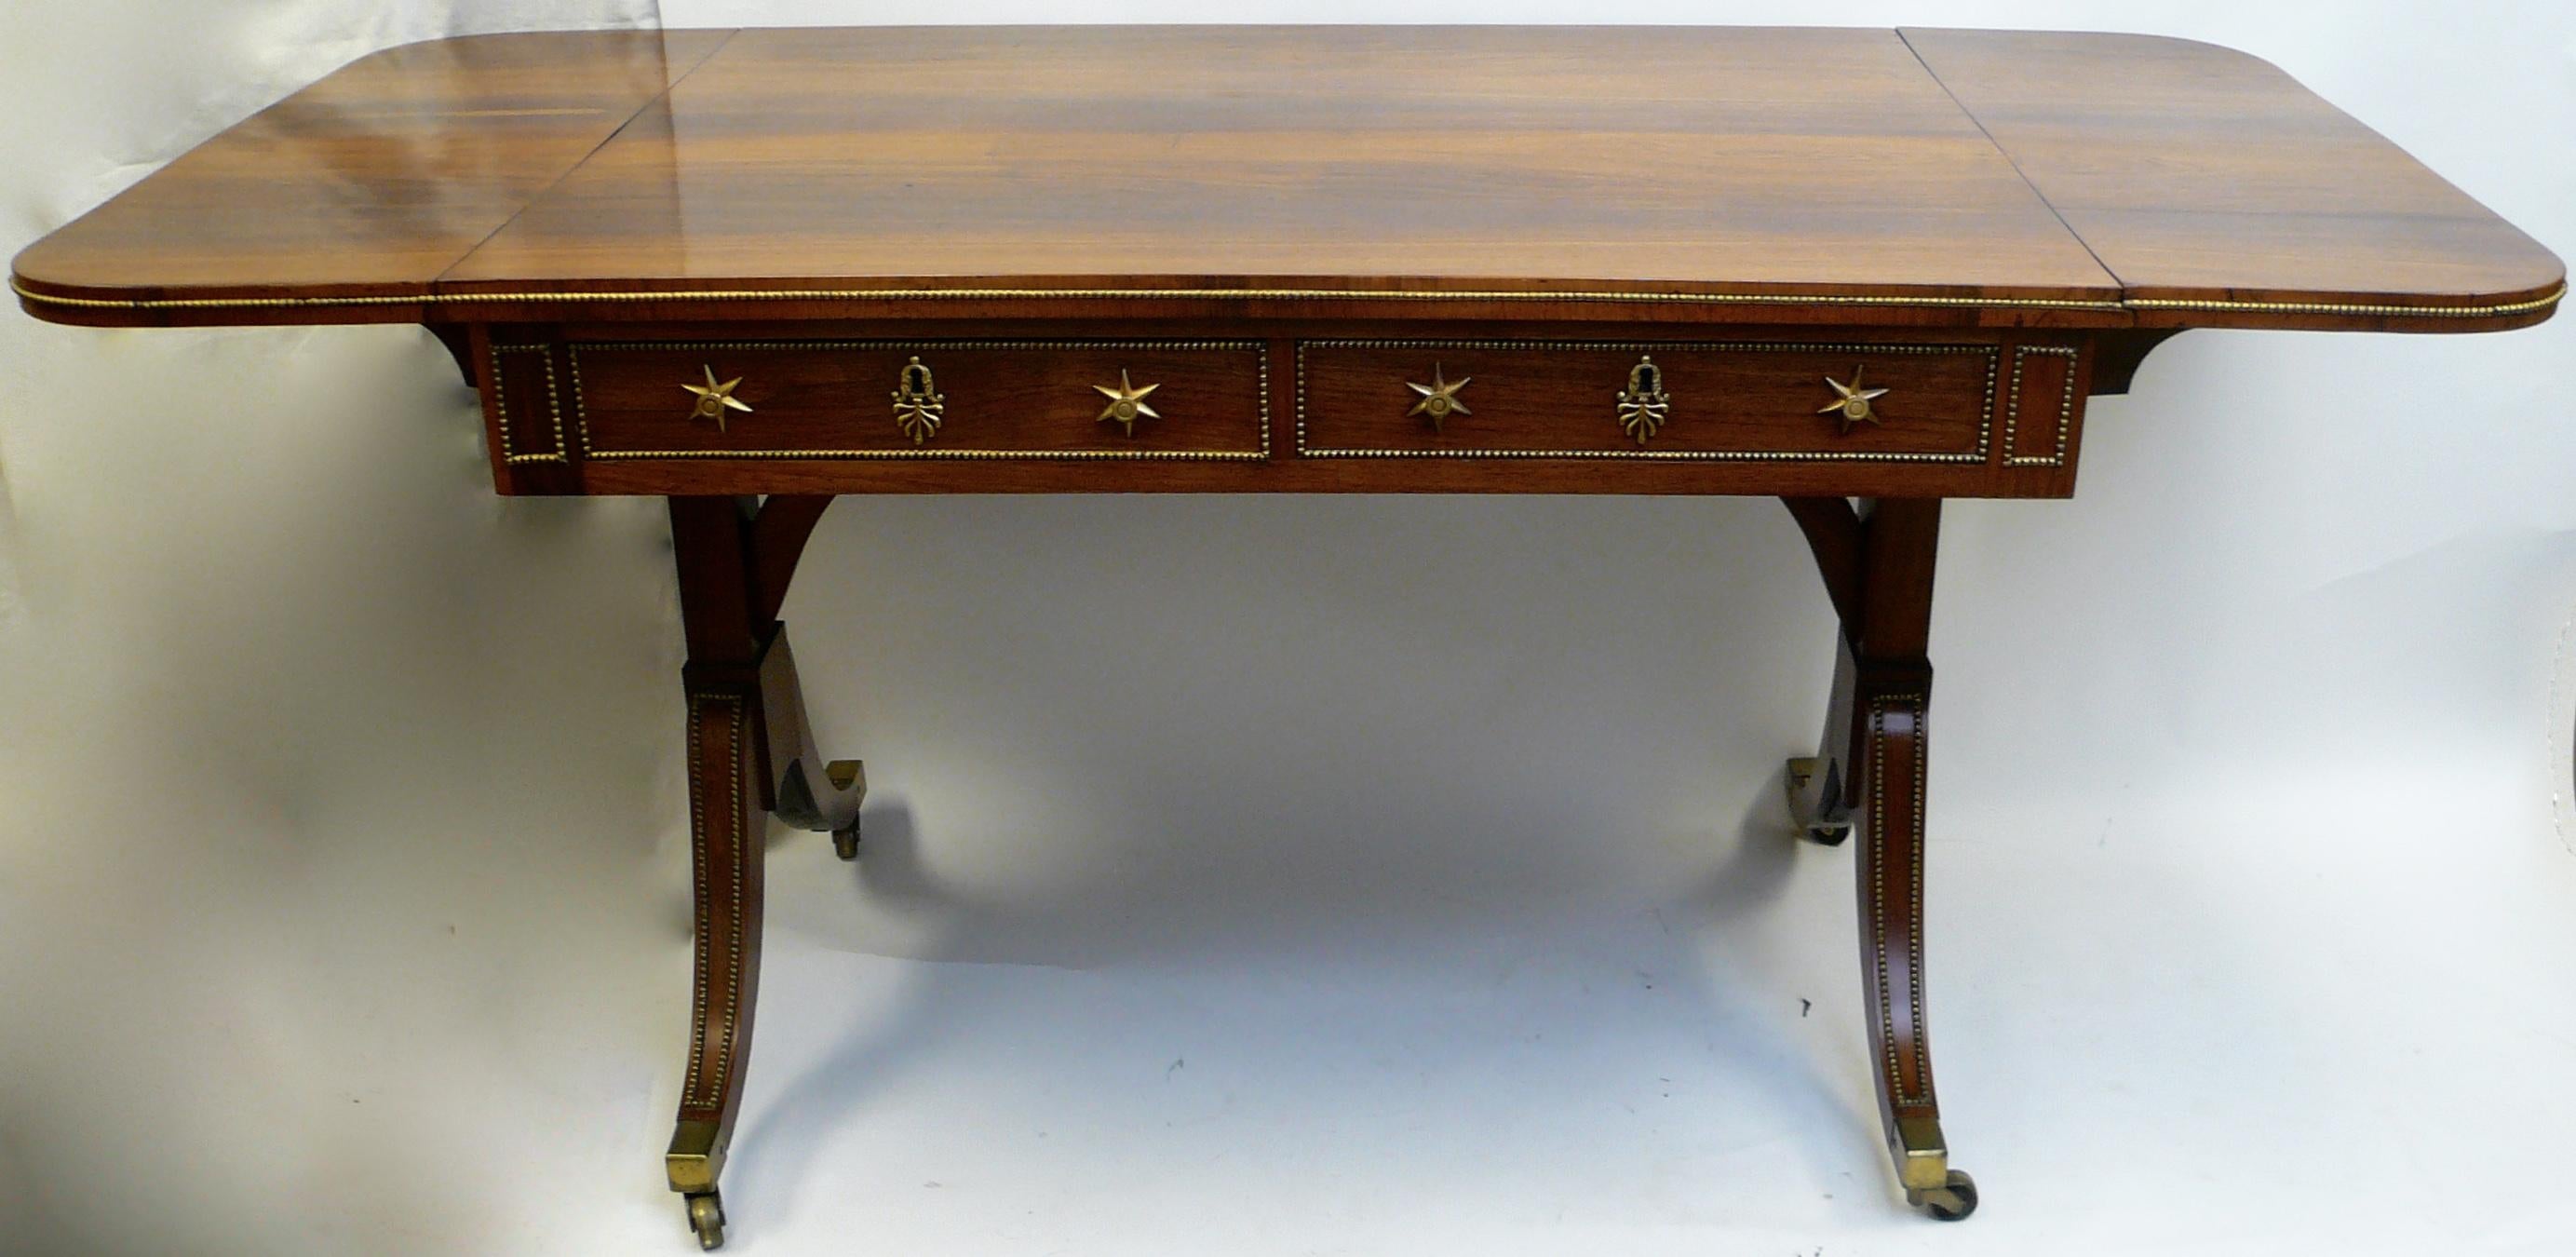 19th Century English Rosewood Sofa Table, Attributed to Gillows of Lancaster, circa 1800